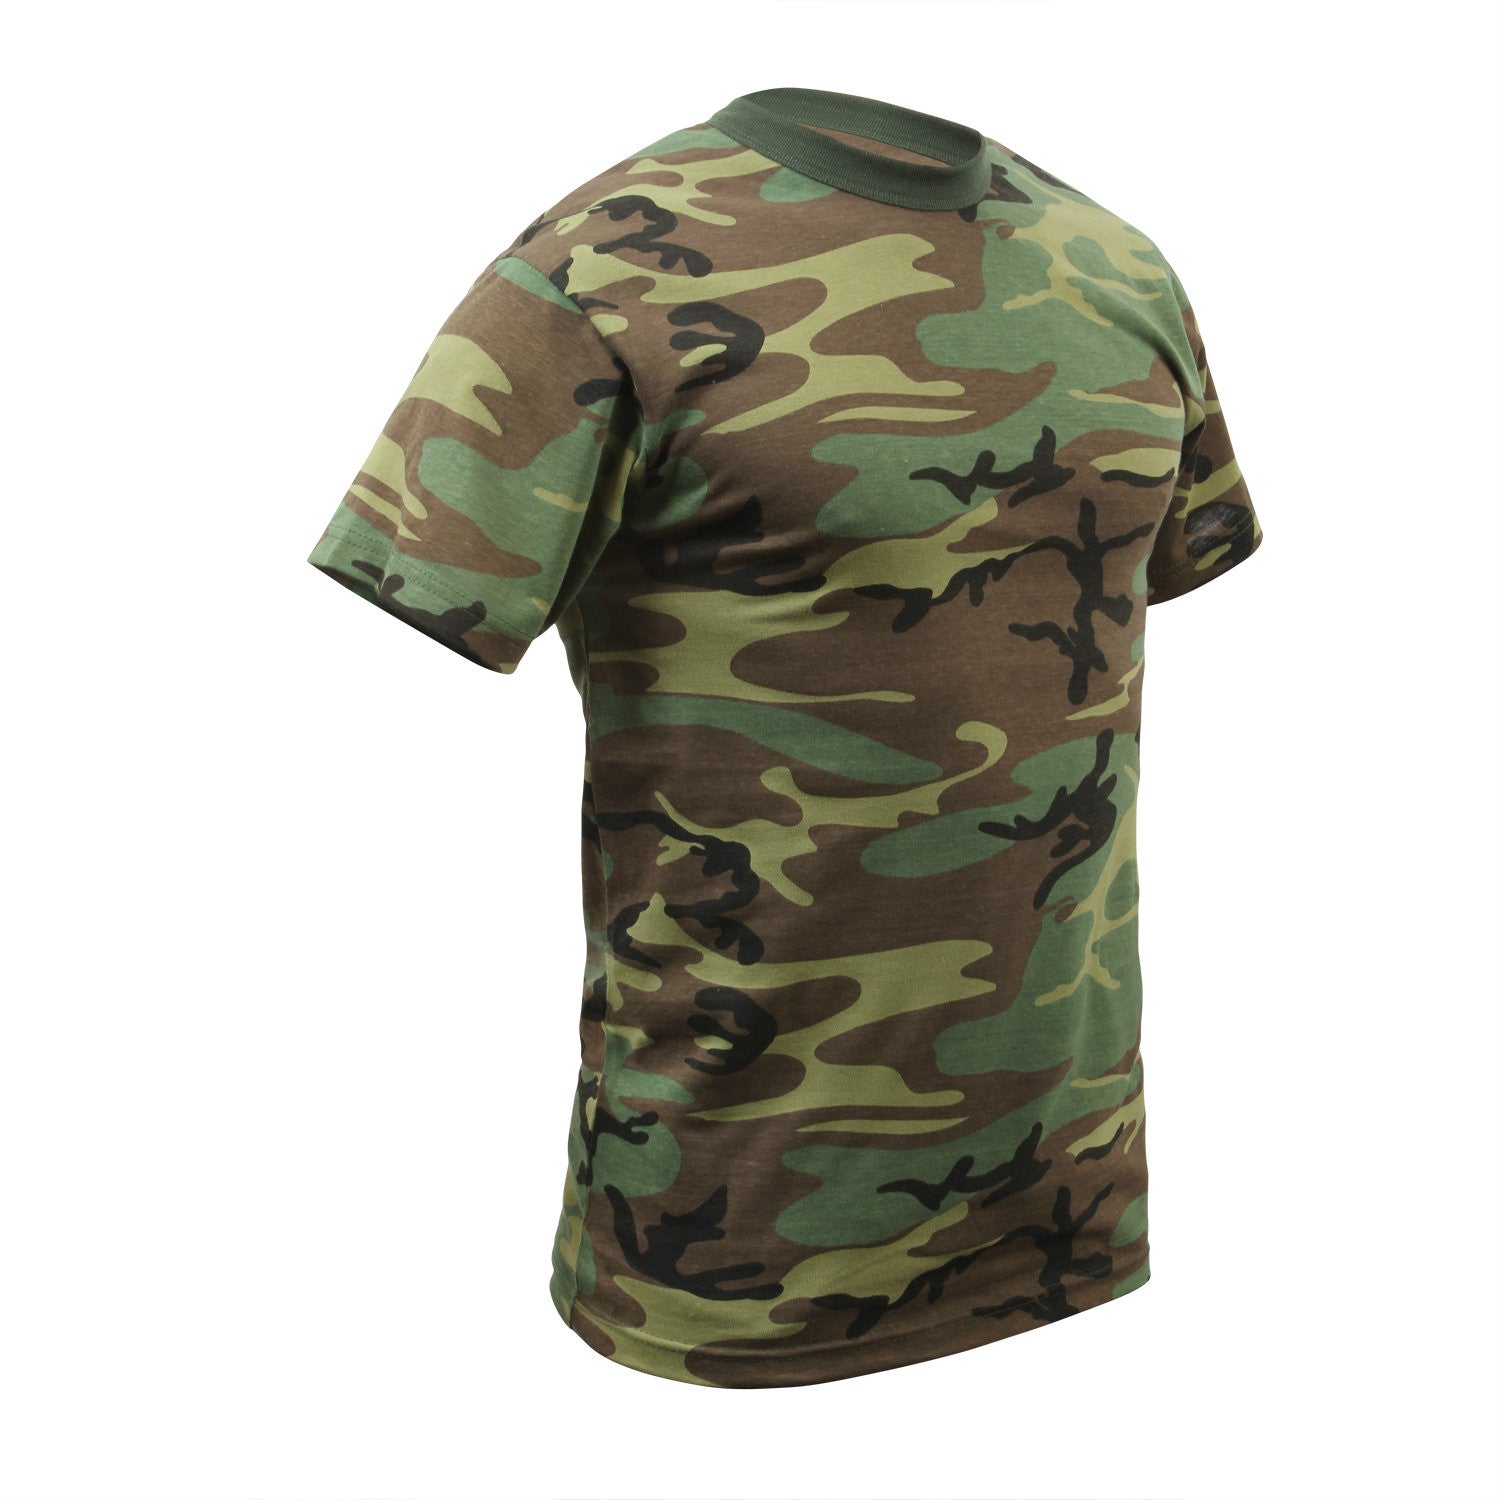 Woodland Camouflage T-Shirt - Army Navy Gear